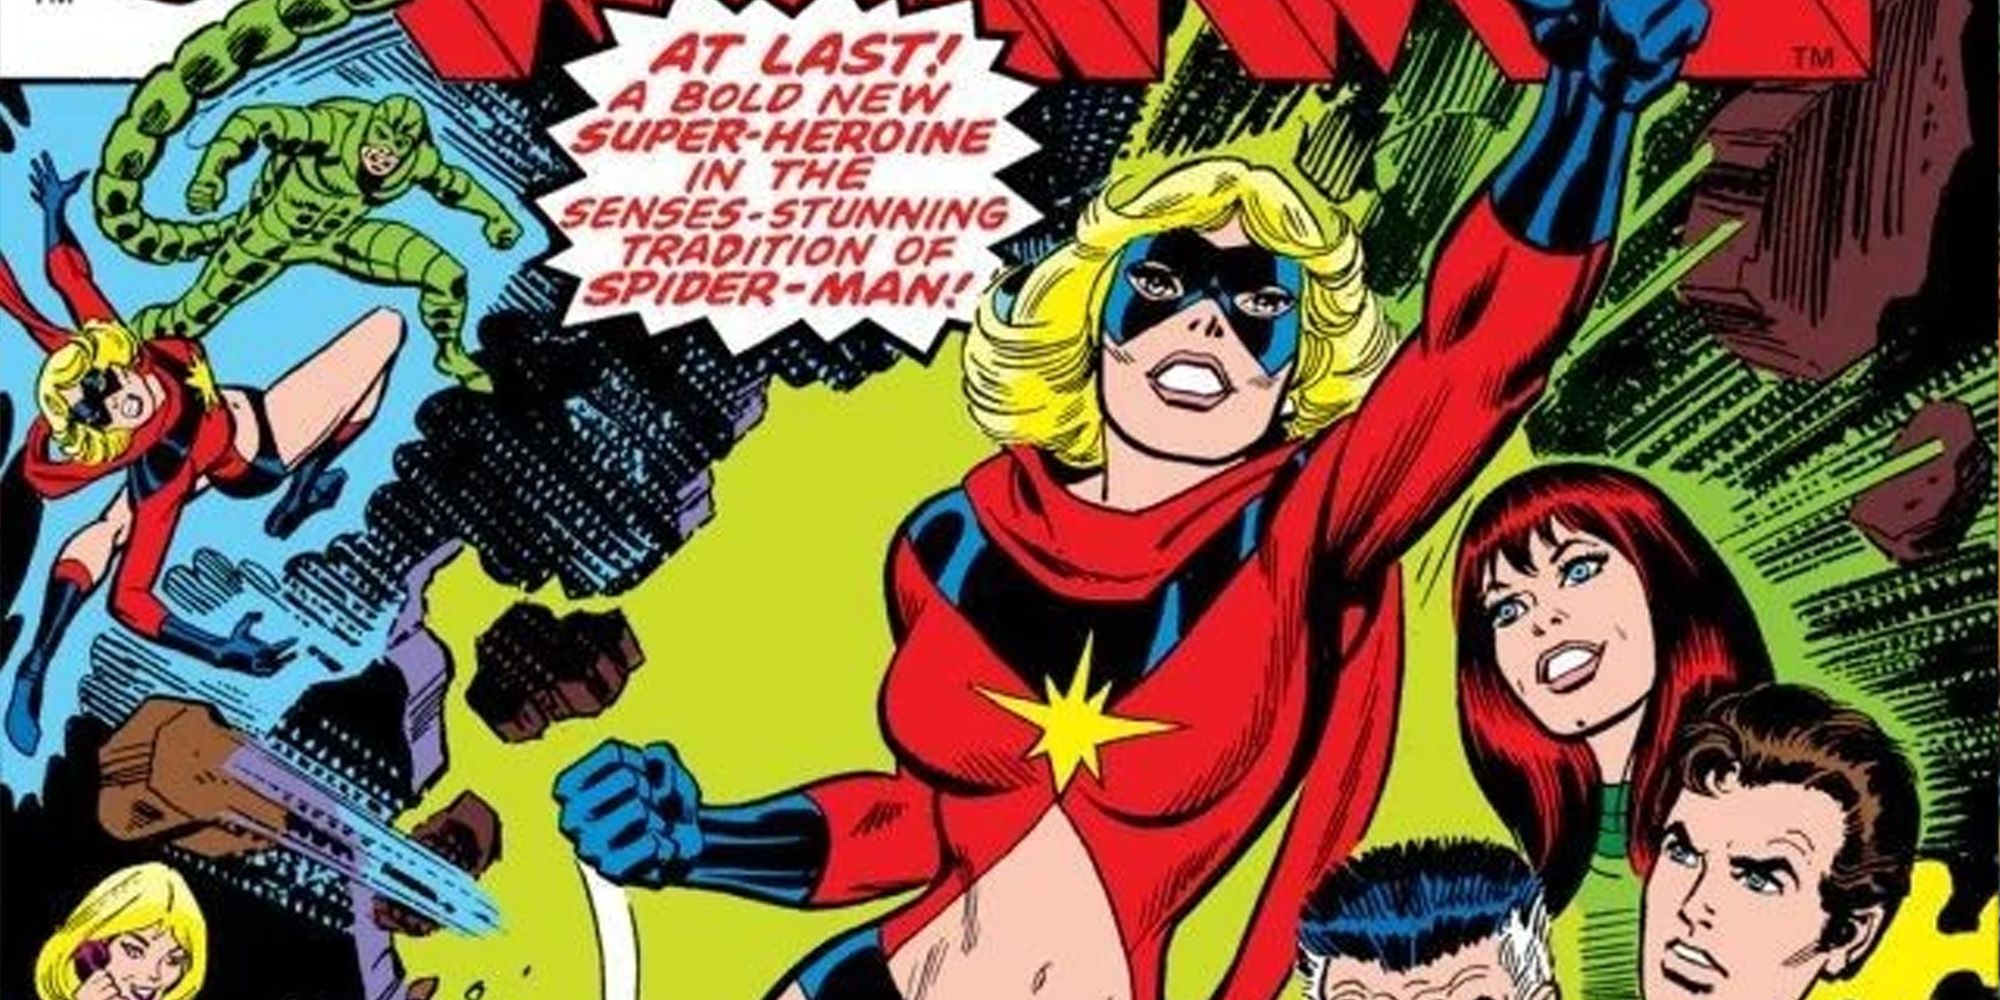 An image of Captain Marvel about to fly in the Marvel Comics